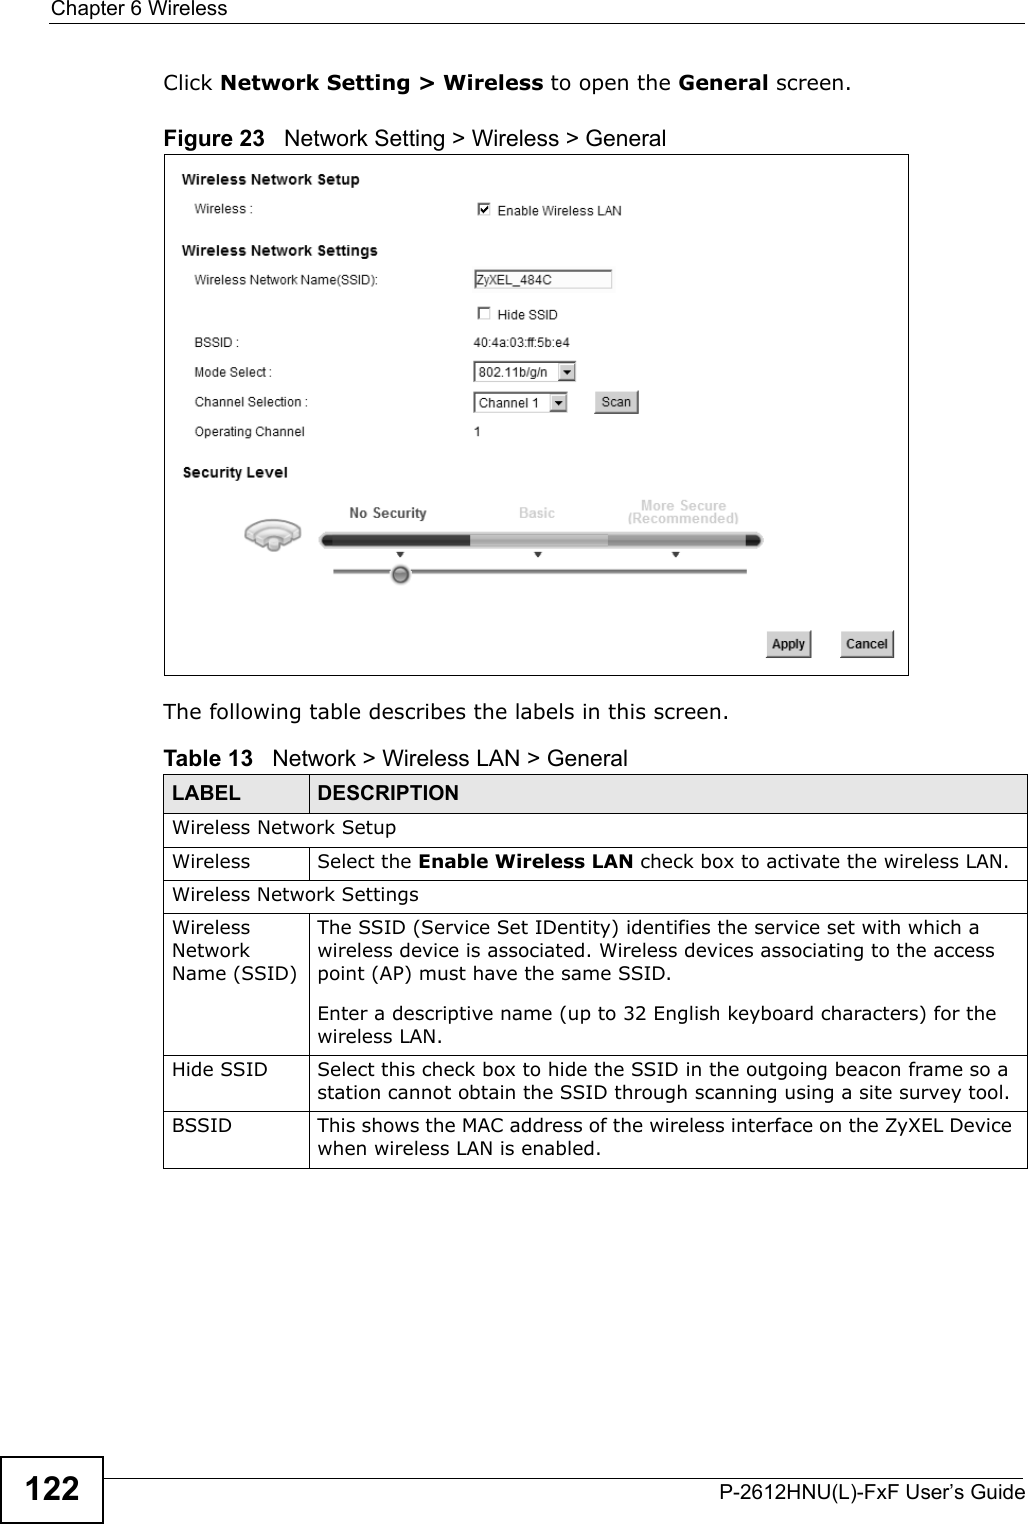 Chapter 6 WirelessP-2612HNU(L)-FxF User’s Guide122Click Network Setting &gt; Wireless to open the General screen.Figure 23   Network Setting &gt; Wireless &gt; General The following table describes the labels in this screen.Table 13   Network &gt; Wireless LAN &gt; GeneralLABEL DESCRIPTIONWireless Network SetupWireless Select the Enable Wireless LAN check box to activate the wireless LAN.Wireless Network SettingsWireless Network Name (SSID)The SSID (Service Set IDentity) identifies the service set with which a wireless device is associated. Wireless devices associating to the access point (AP) must have the same SSID.Enter a descriptive name (up to 32 English keyboard characters) for the wireless LAN. Hide SSID Select this check box to hide the SSID in the outgoing beacon frame so a station cannot obtain the SSID through scanning using a site survey tool.BSSID This shows the MAC address of the wireless interface on the ZyXEL Device when wireless LAN is enabled.